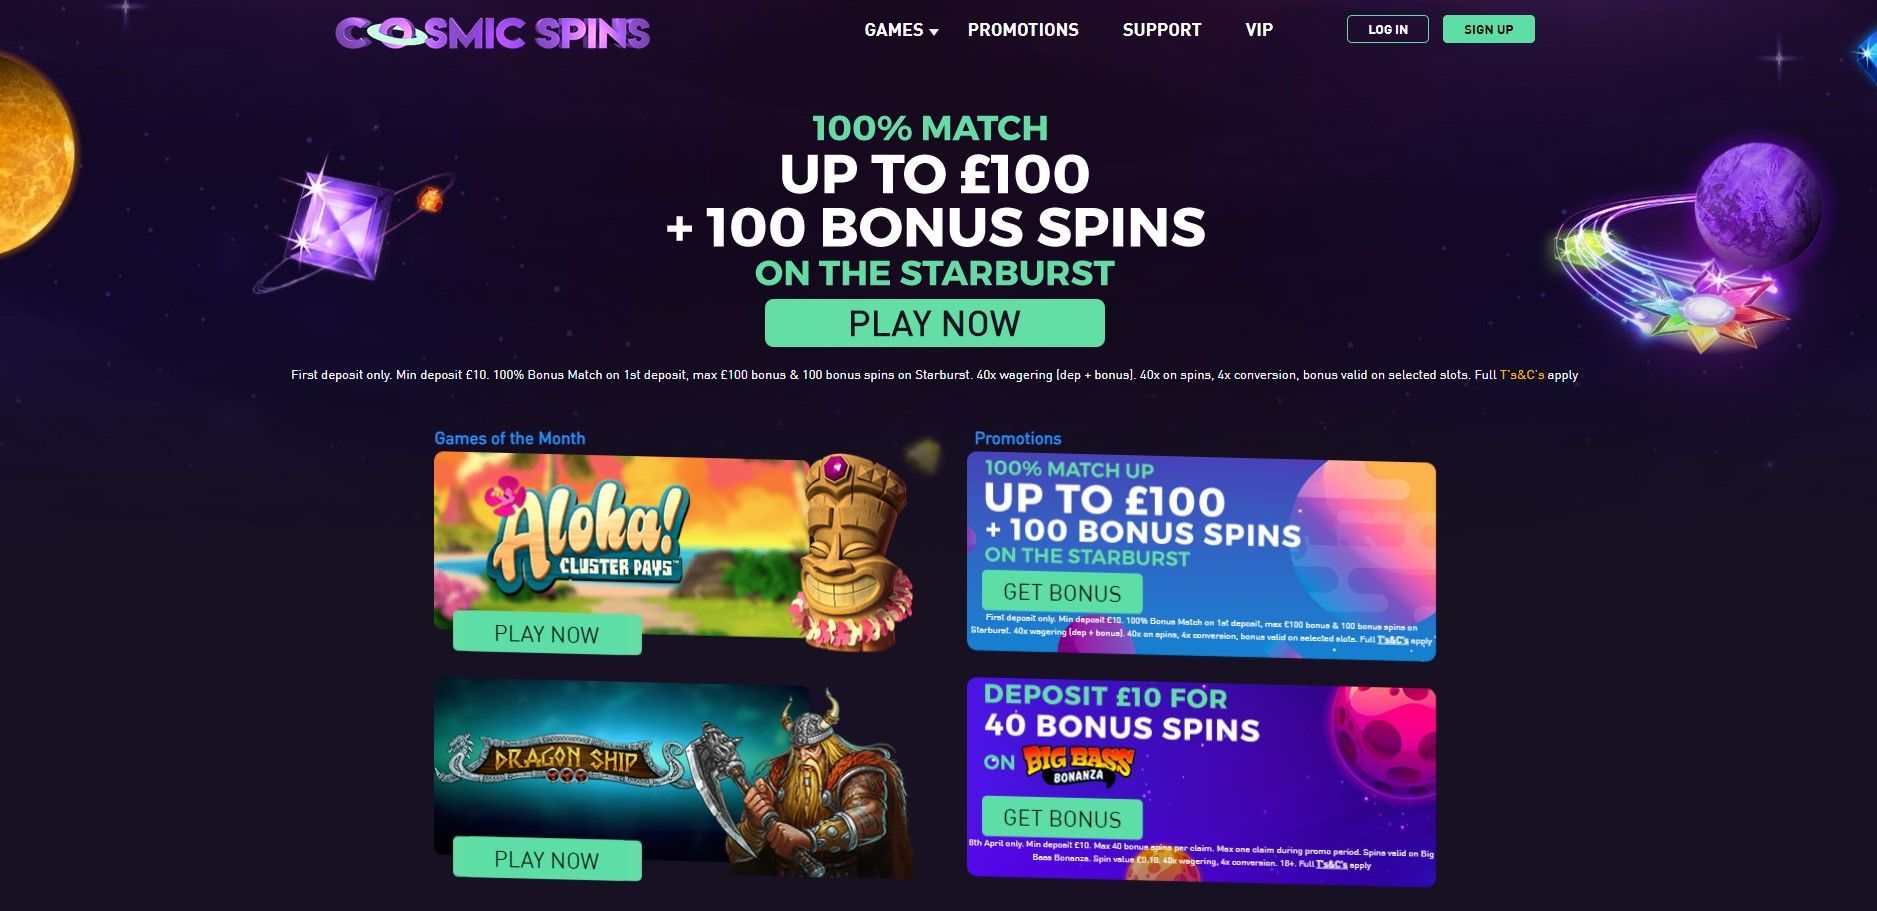 cosmic spins online casino Offer from Go Gambling